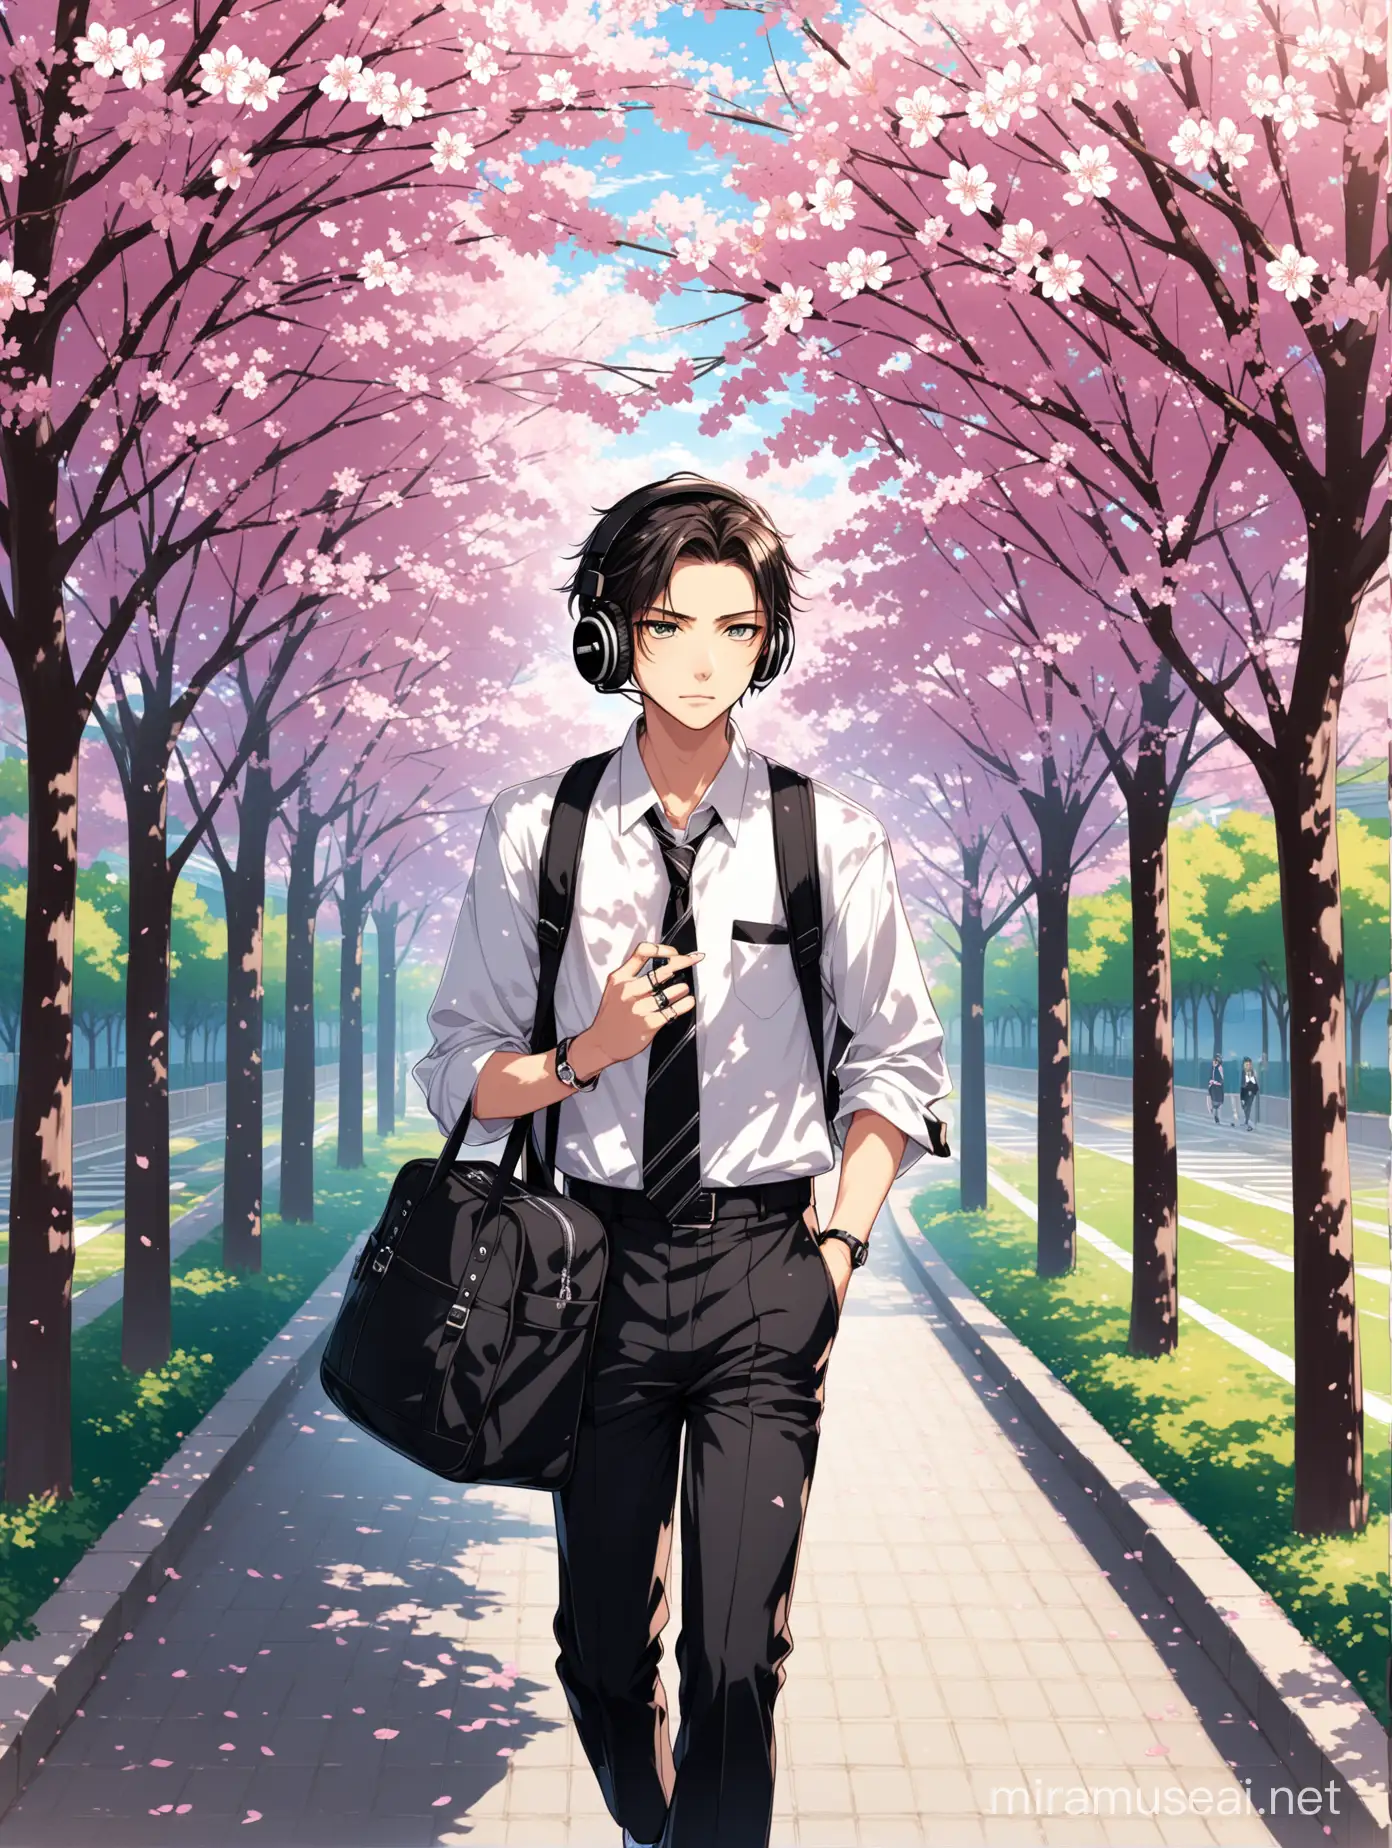 A handsome, mysterious teenage boy. His hair is black and tied back. He wears eyeliner, a black earring, and a ring on his lower lip. He has a sleepy look in his eyes. He wears black headphones, wears vans black shoes and wears rings on his fingers. Wearing a school uniform and carrying a black bag on his shoulder, he is walking along the school path with sakura trees on the side, and all of this is happening in Tokyo, Japan.